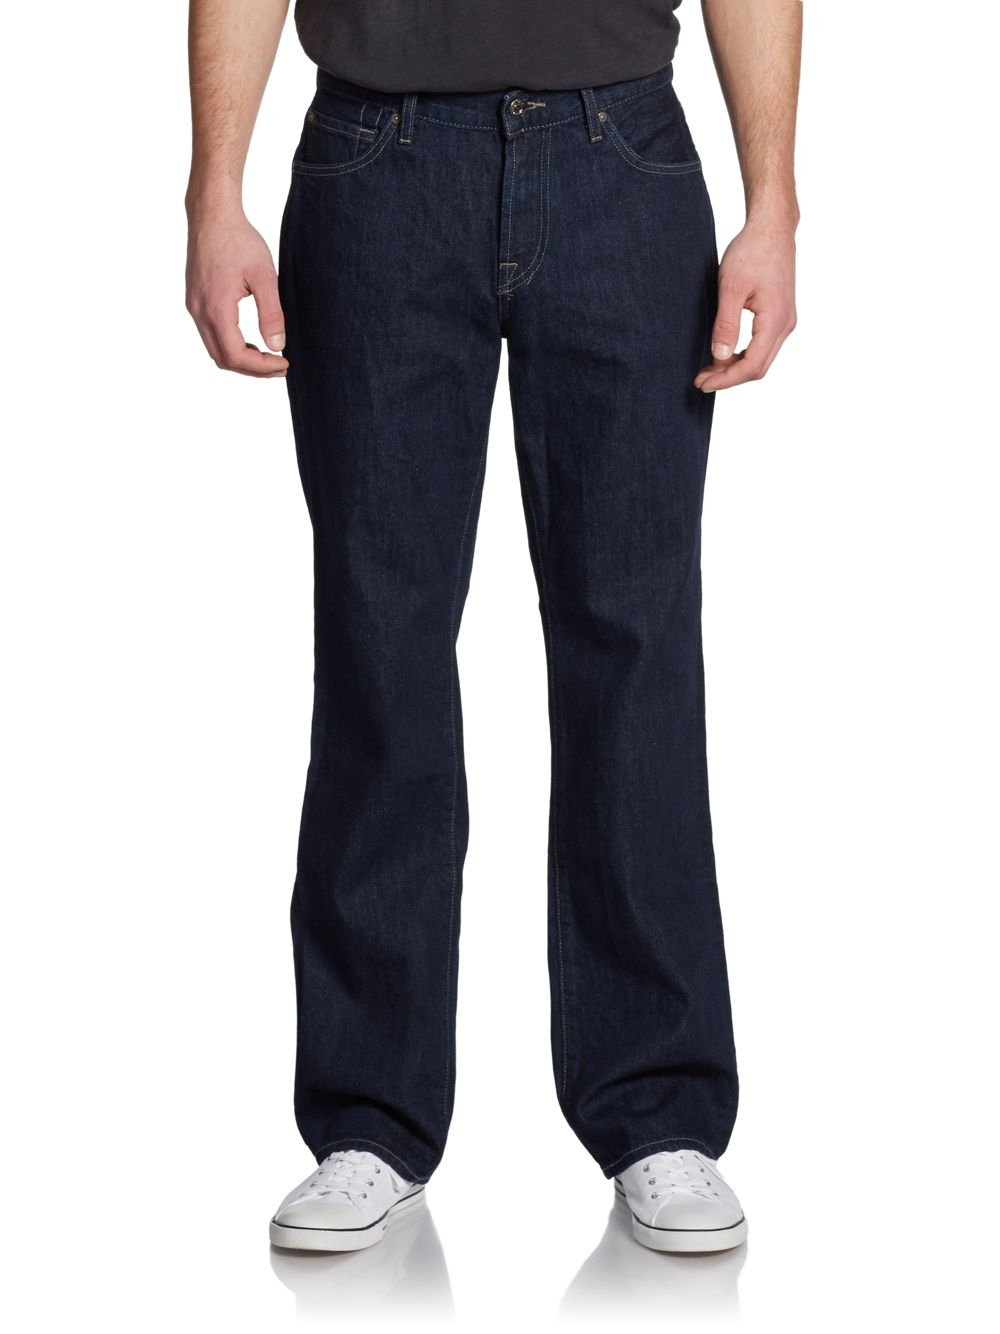 7 for all mankind jeans review mens